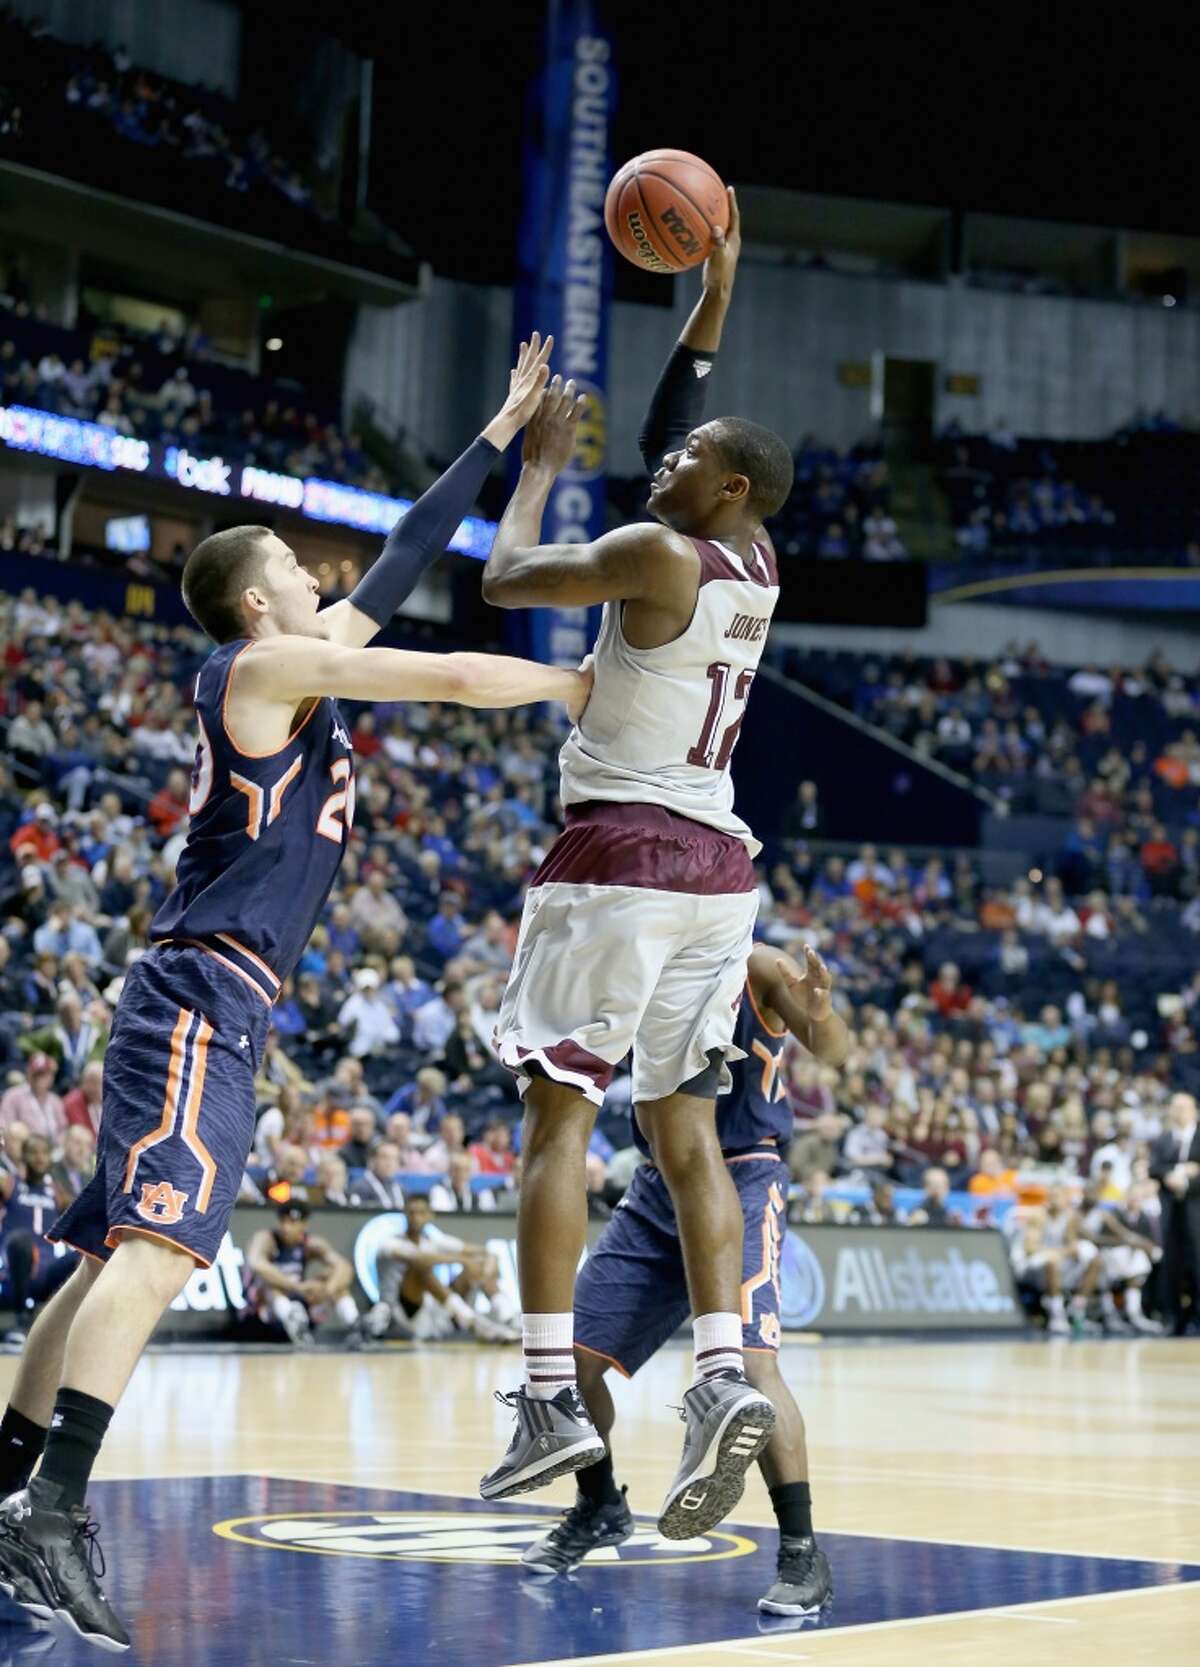 NASHVILLE, TN - MARCH 12: Jalen Jones #12 of the Texas A&M Aggies shoots the ball against the Auburn Tigers during the second round game of the SEC Basketball Tournament at Bridgestone Arena on March 12, 2015 in Nashville, Tennessee. (Photo by Andy Lyons/Getty Images)